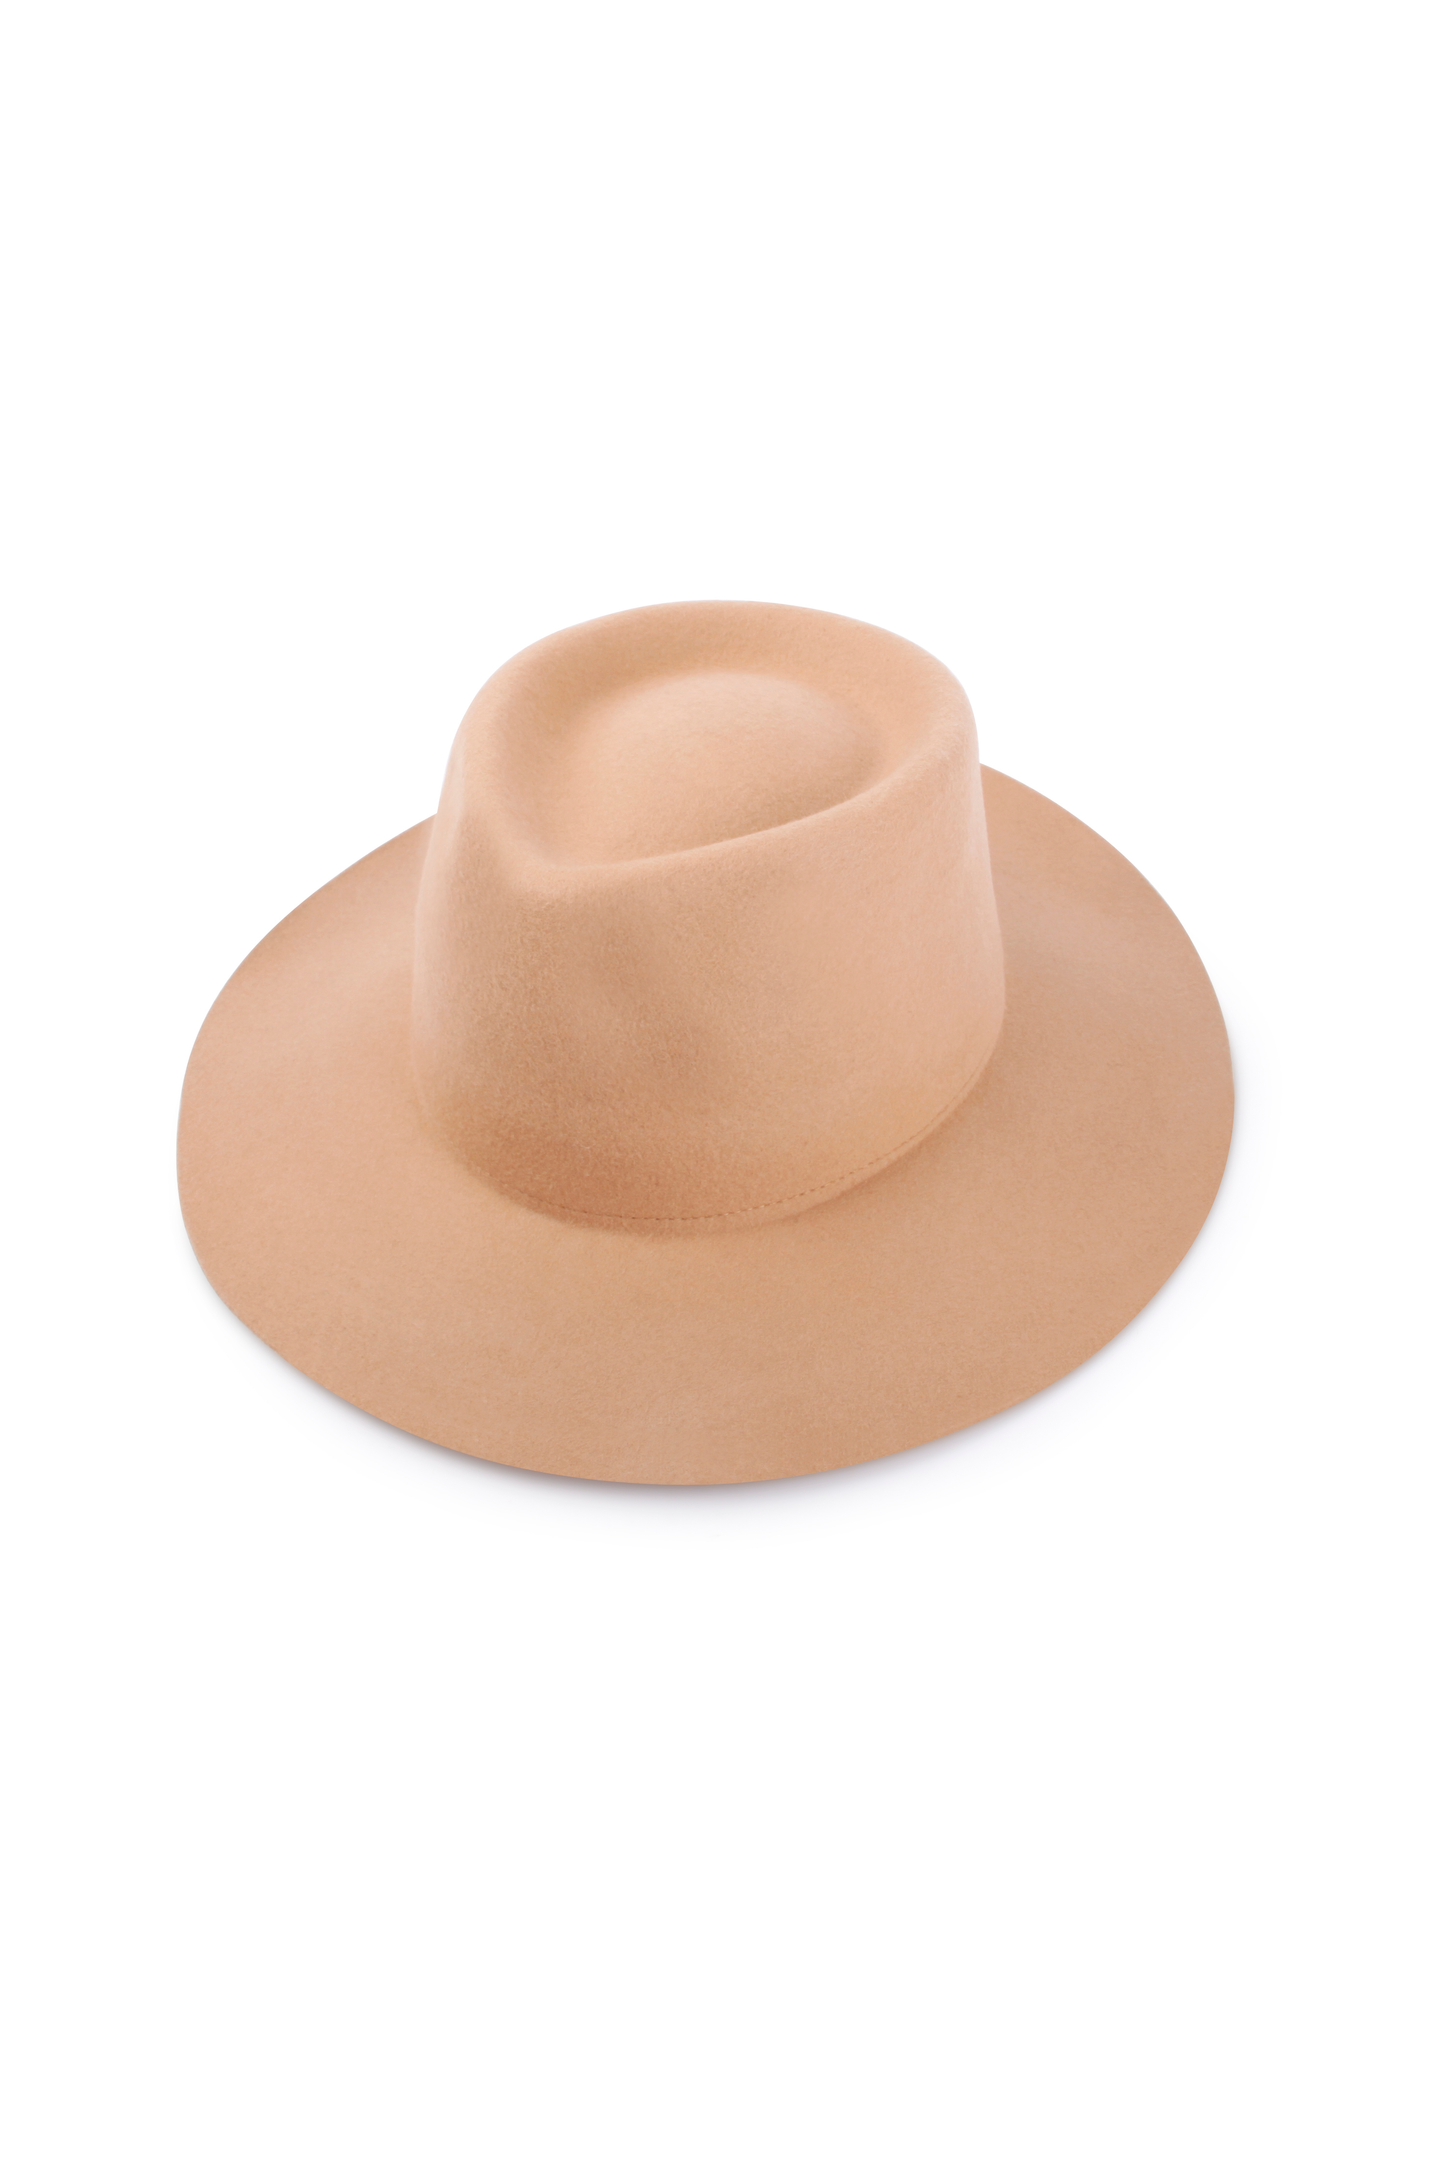 The Drip - Camel Hat